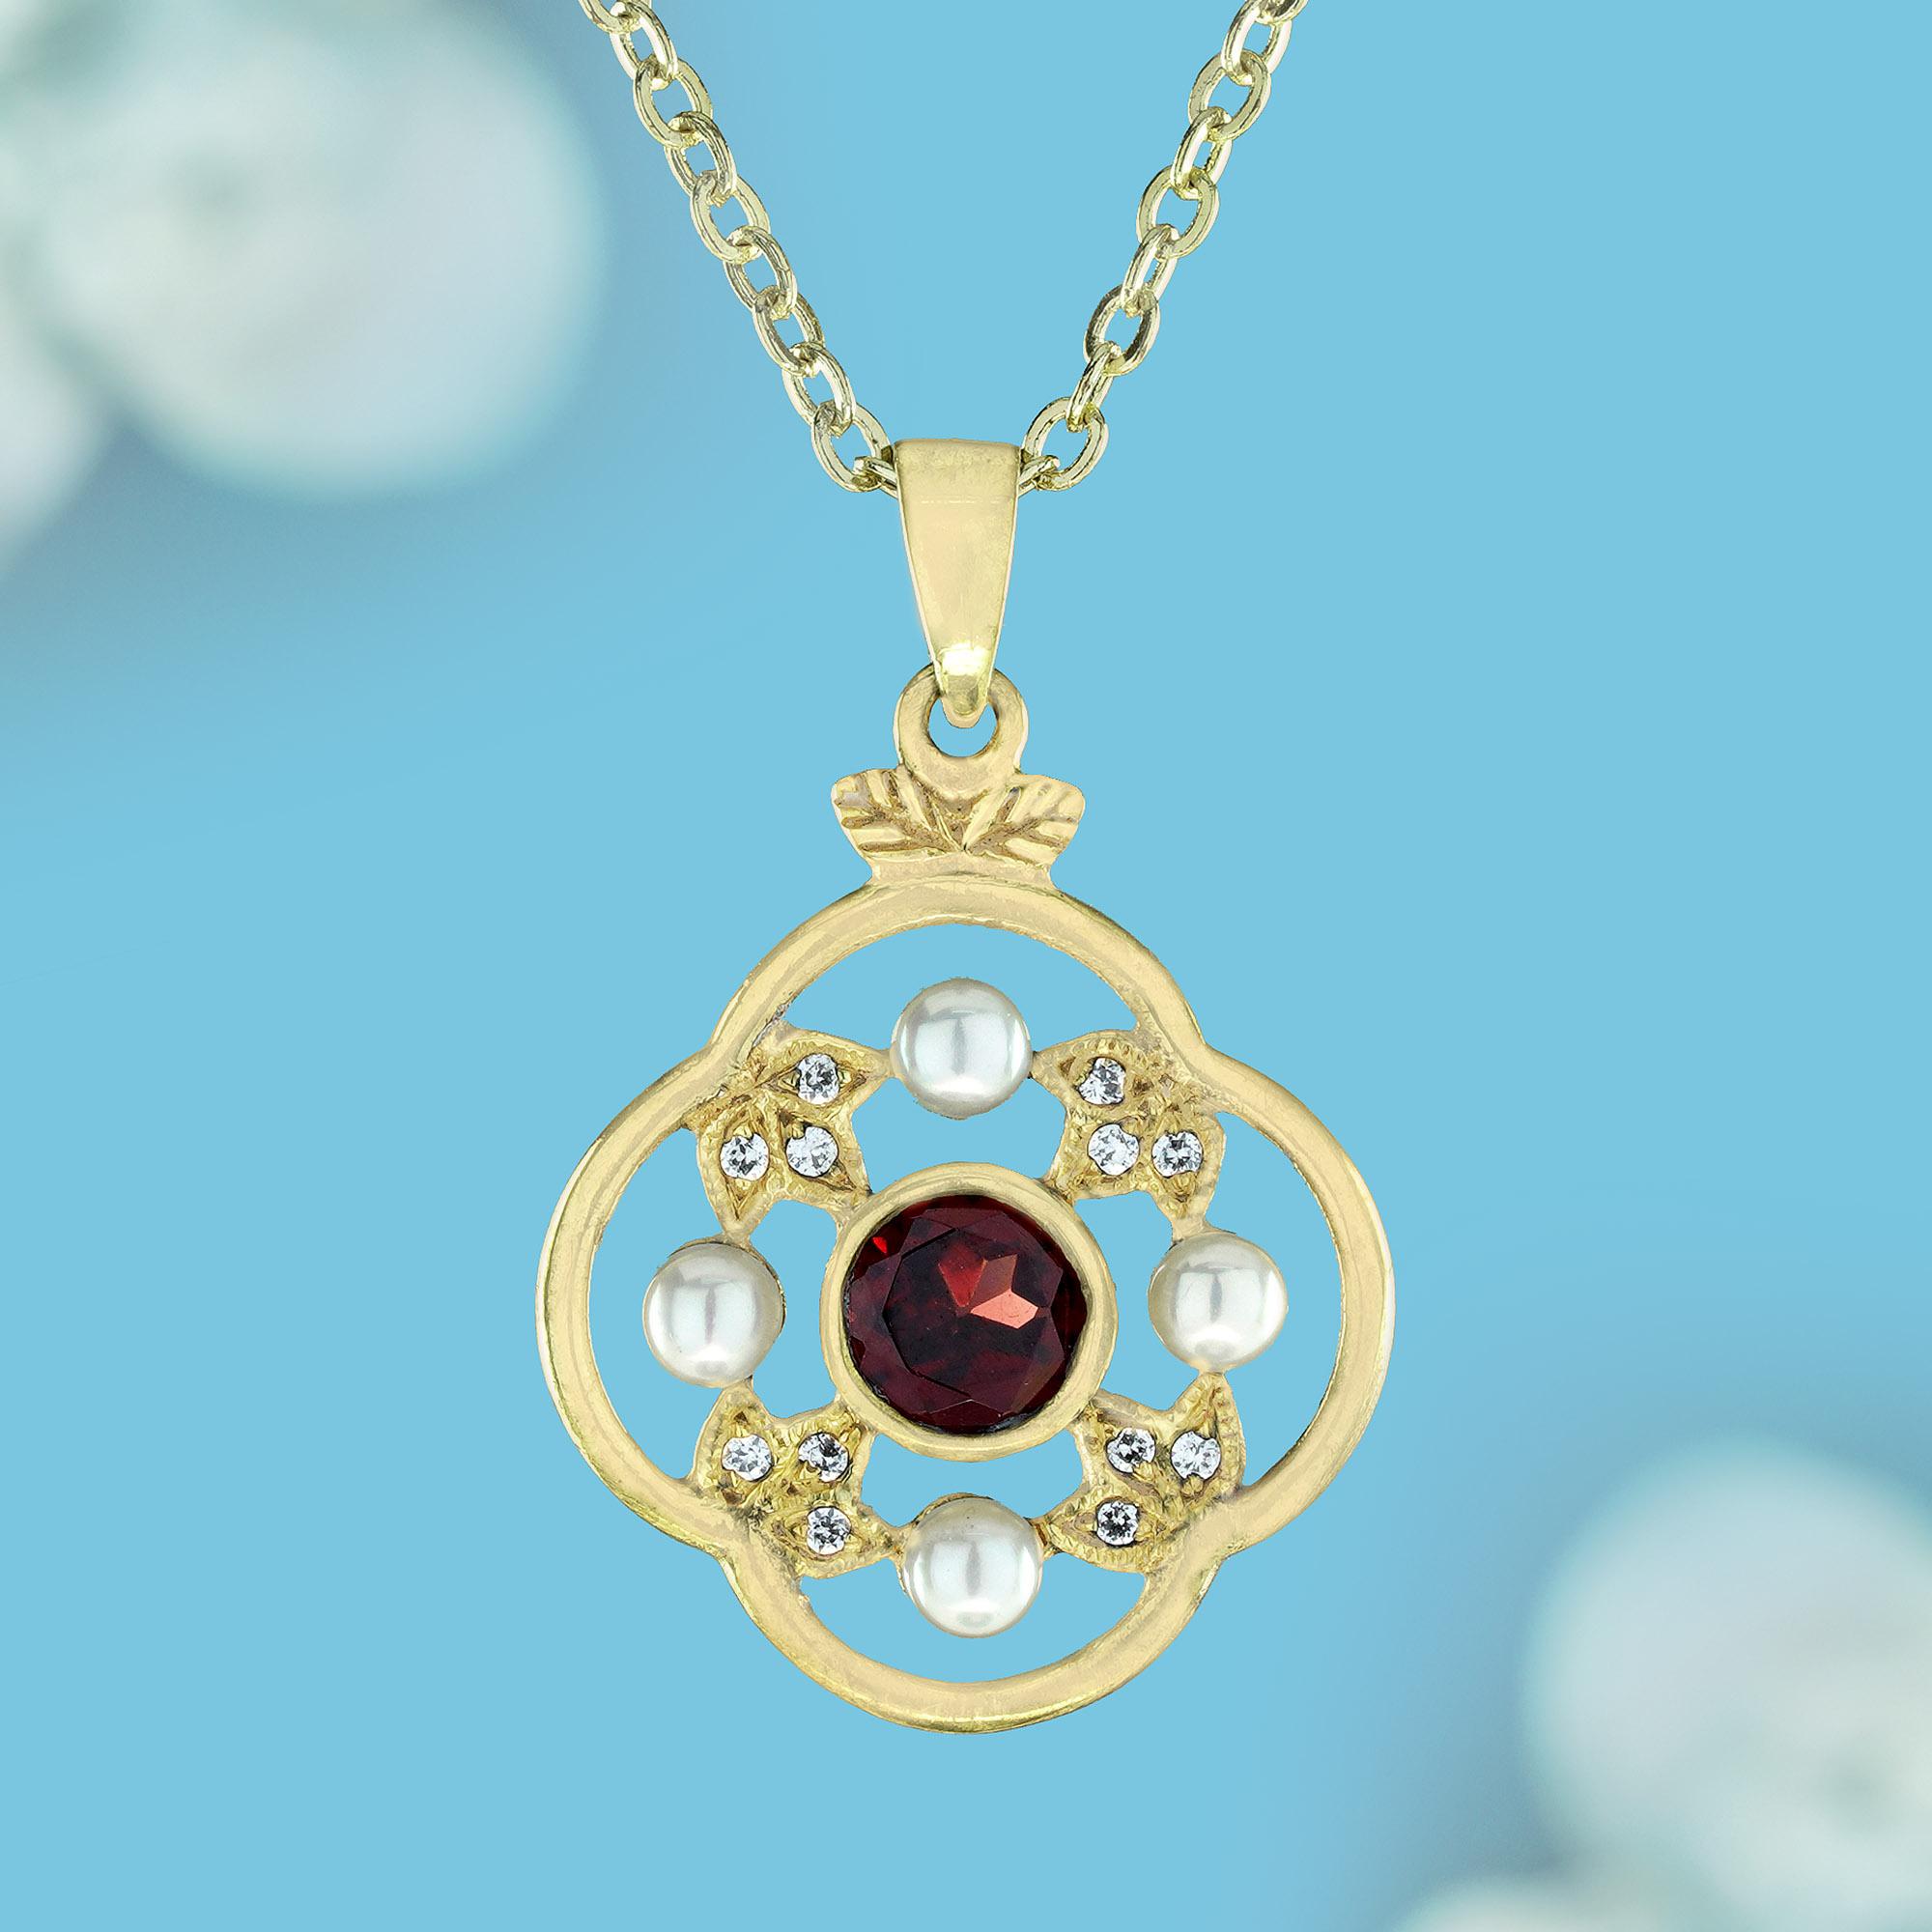 Elevate your elegance with our exquisite natural garnet pearl diamond floral pendant in yellow gold. Embrace the allure of round deep red garnet stones, accentuated by four shimmering white pearls, and delicately complemented by dazzling diamonds in